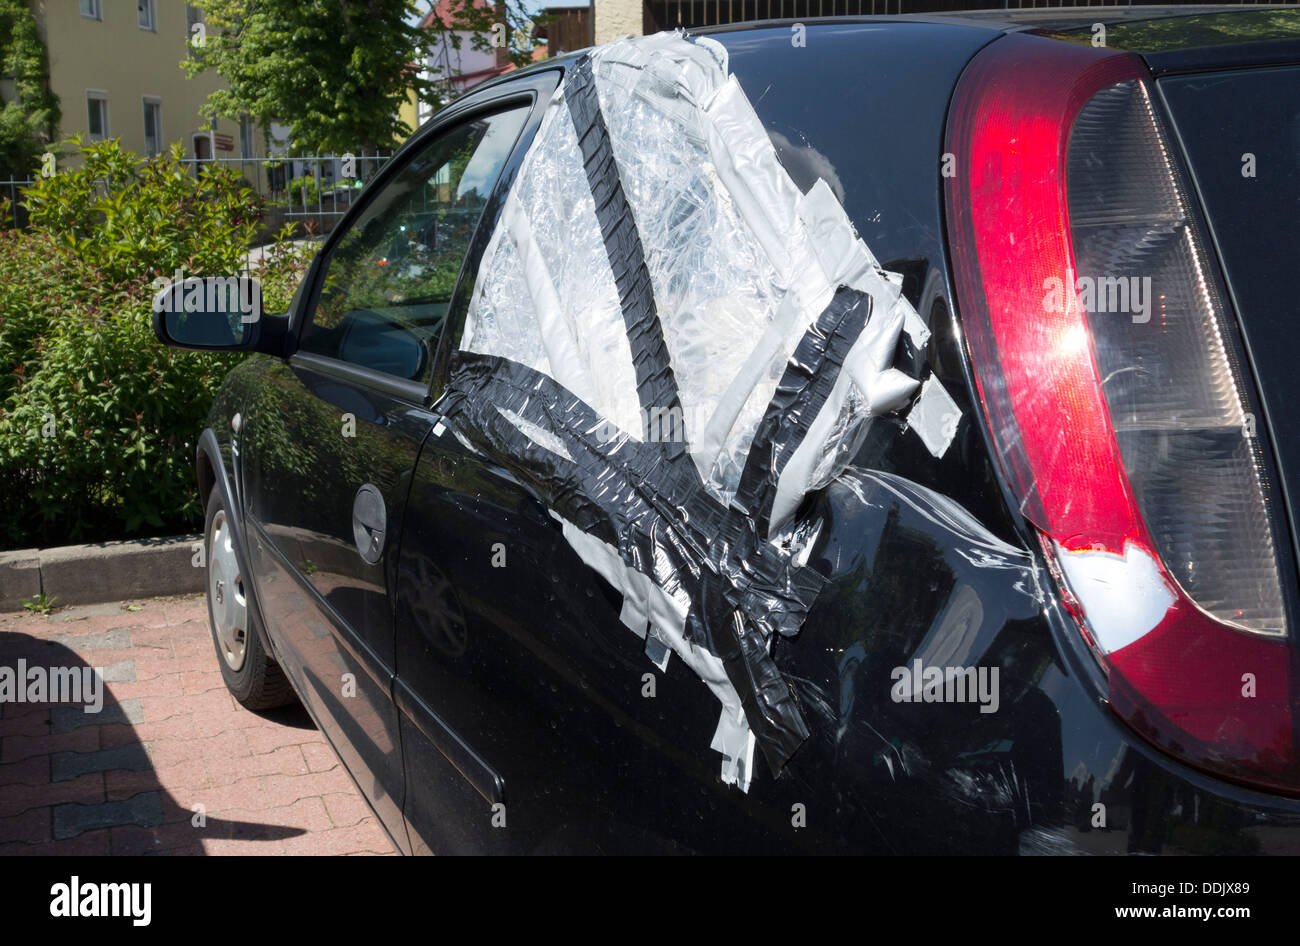 Broken side rear car window covered with plastic sheet, Chiemgau, Upper Bavaria Germany Europe Stock Photo